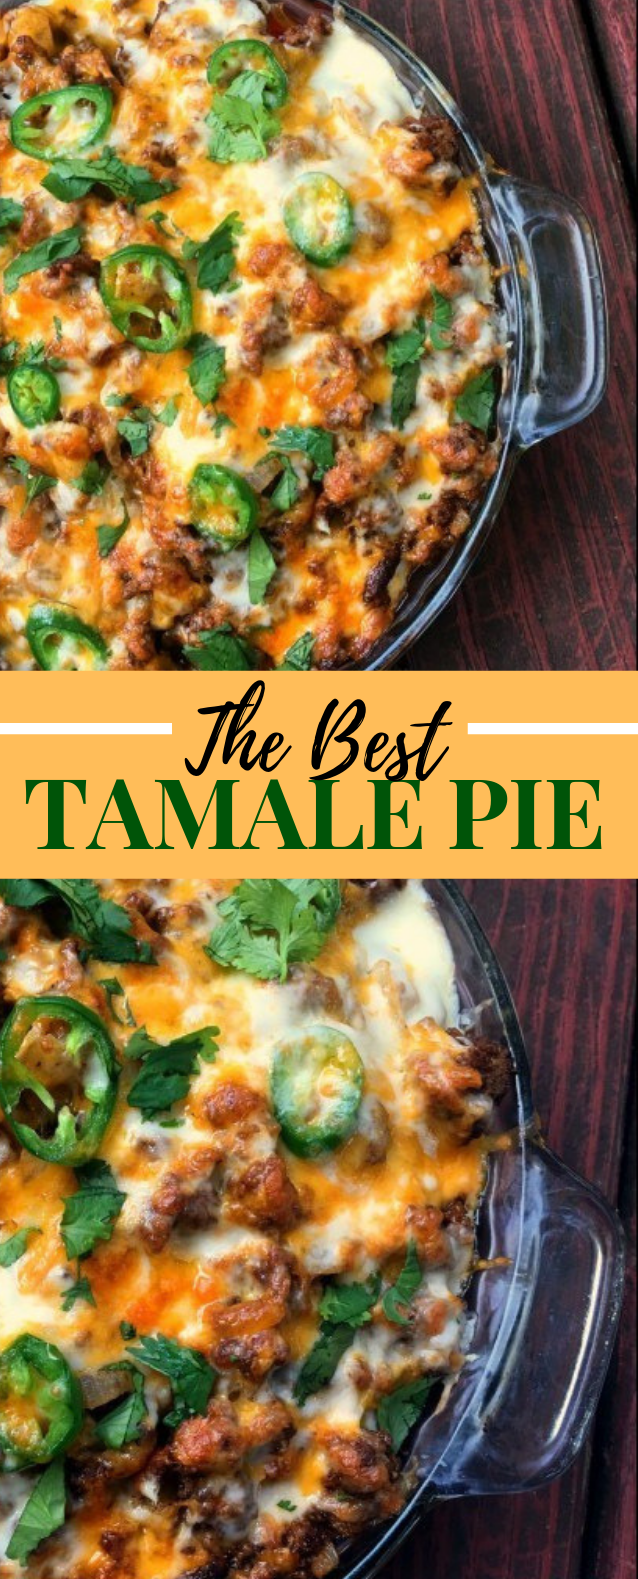 Tamale Pie #dinner #mexican